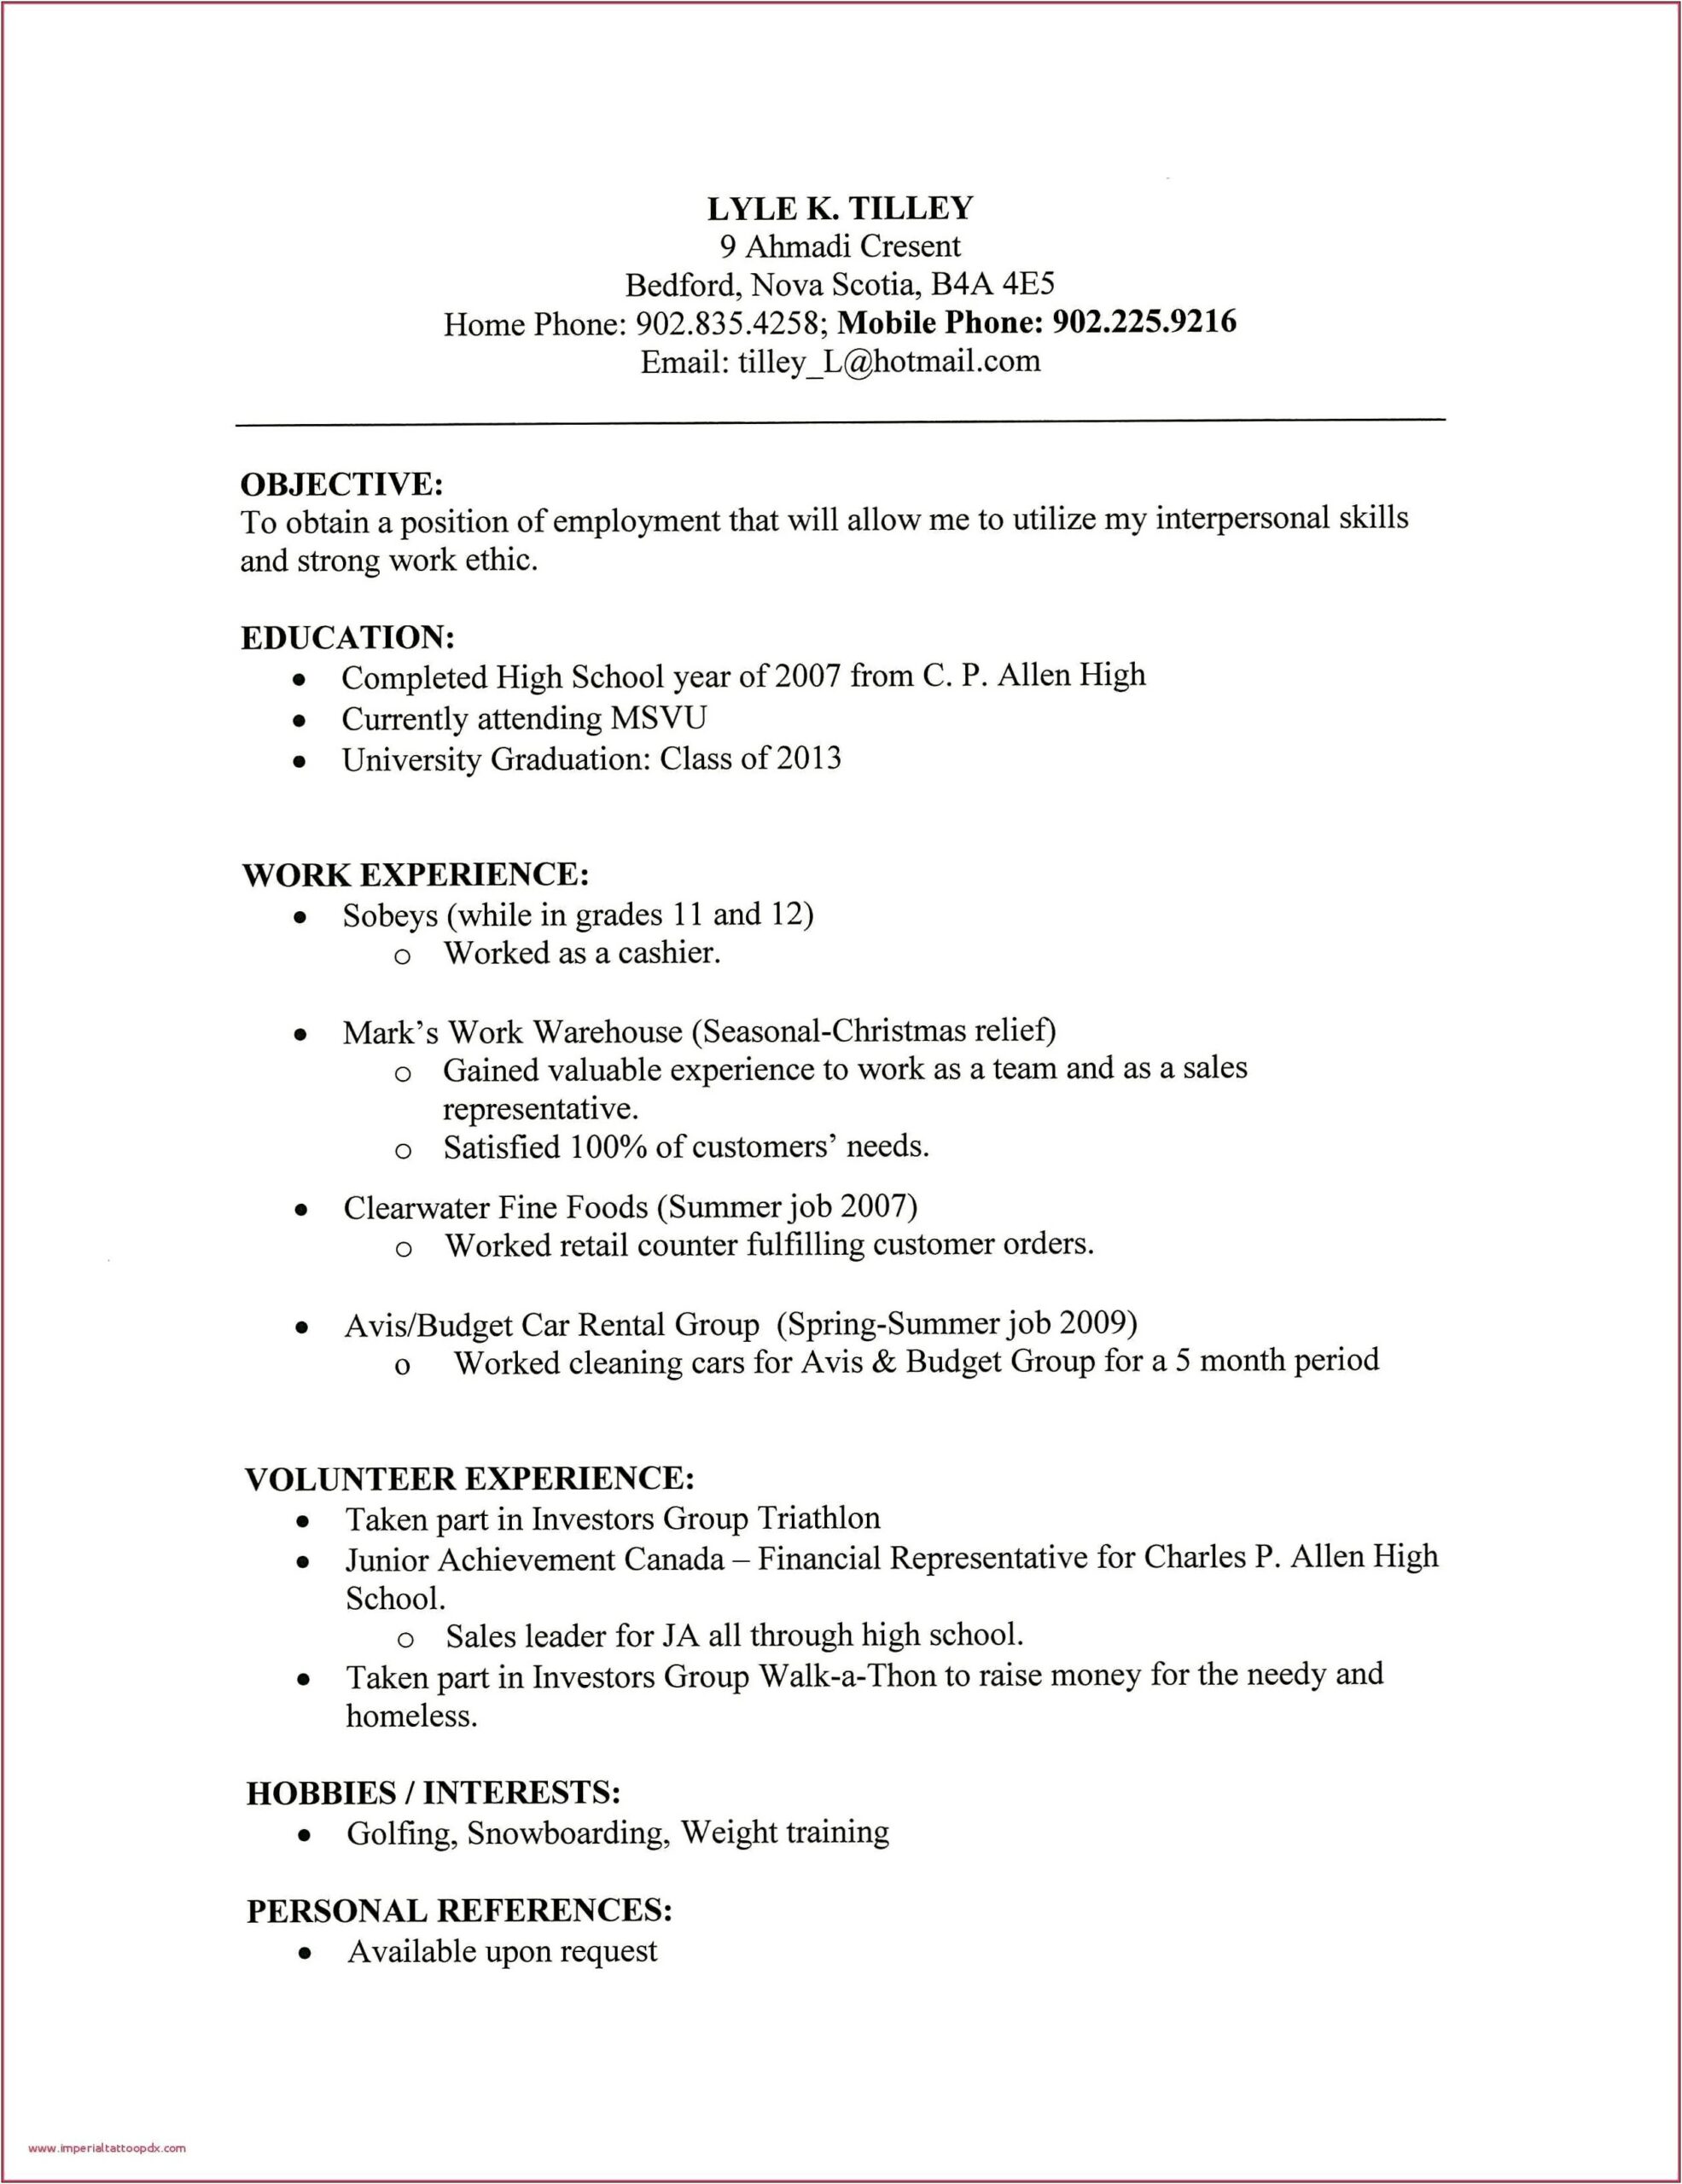 Resume For Sales Rep Job With No Experience